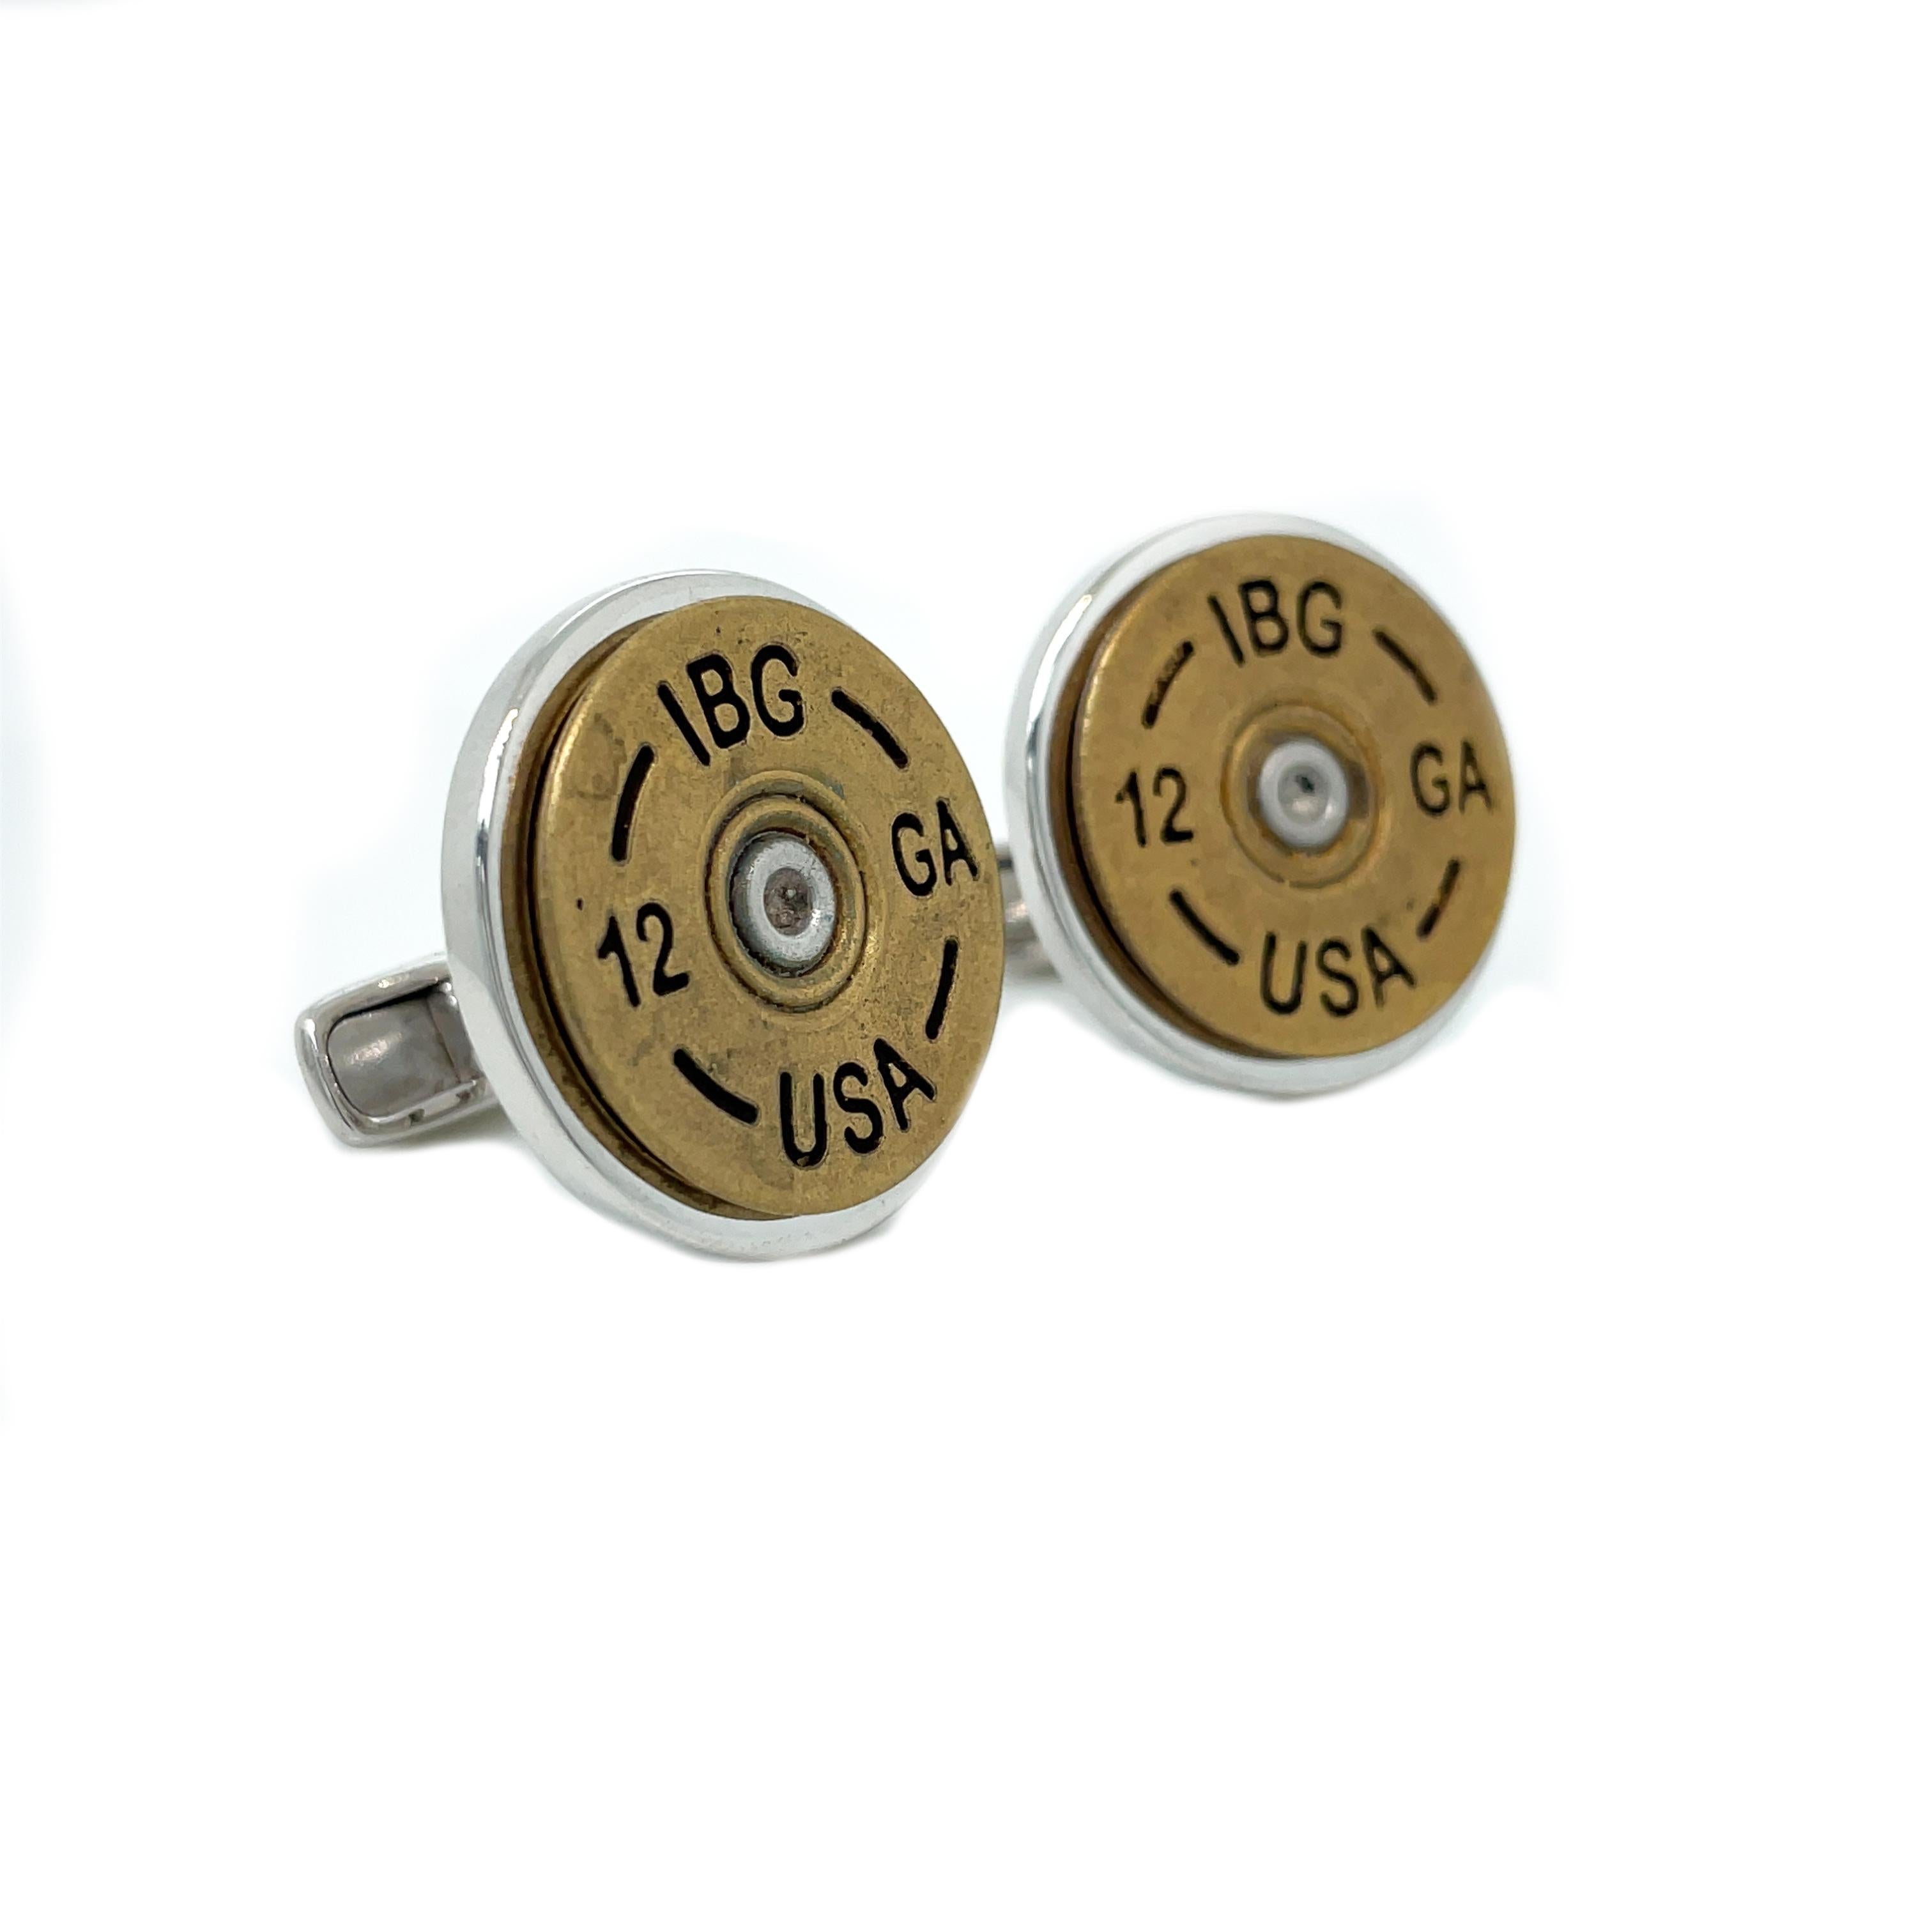 This is an amazing pair of cufflinks that feature the casing of a 12 gauge shotgun shell converted into a set of cufflinks! These cufflinks are brand new and have never been worn. The cufflinks are set in 925 Sterling Silver and the shell is in